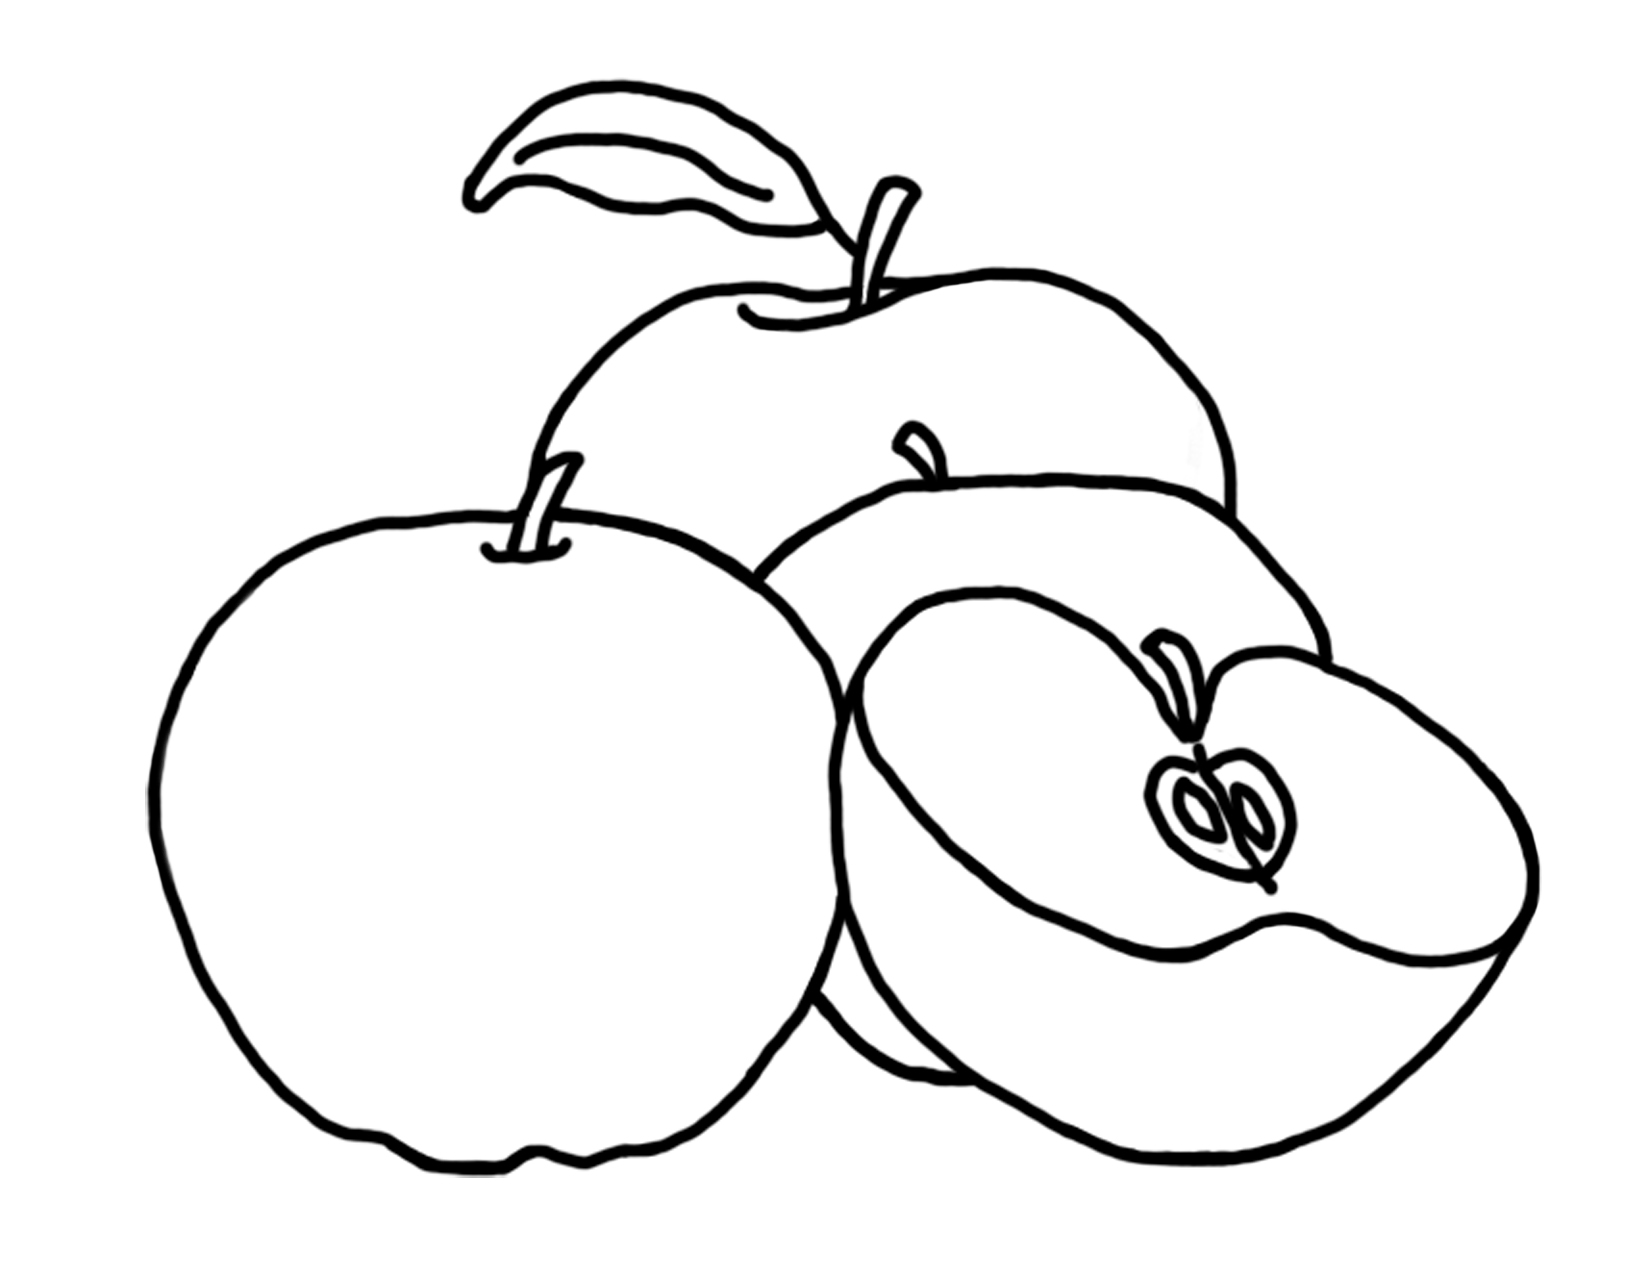 7100 Free Coloring Pages Of An Apple Images & Pictures In HD